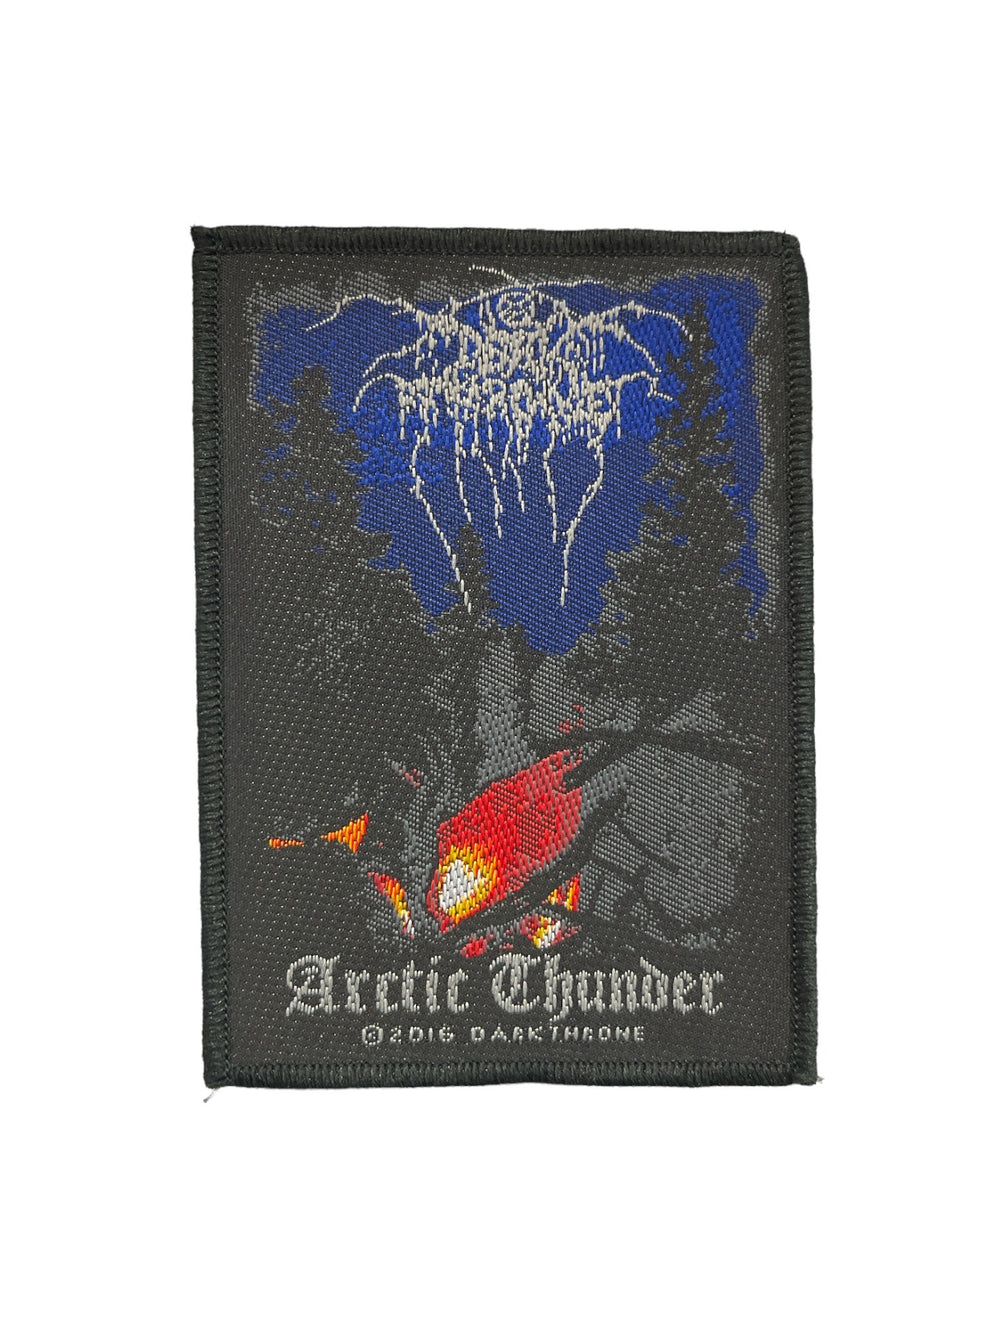 Darkthrone Arctic Thunder Official Woven Patch Brand New